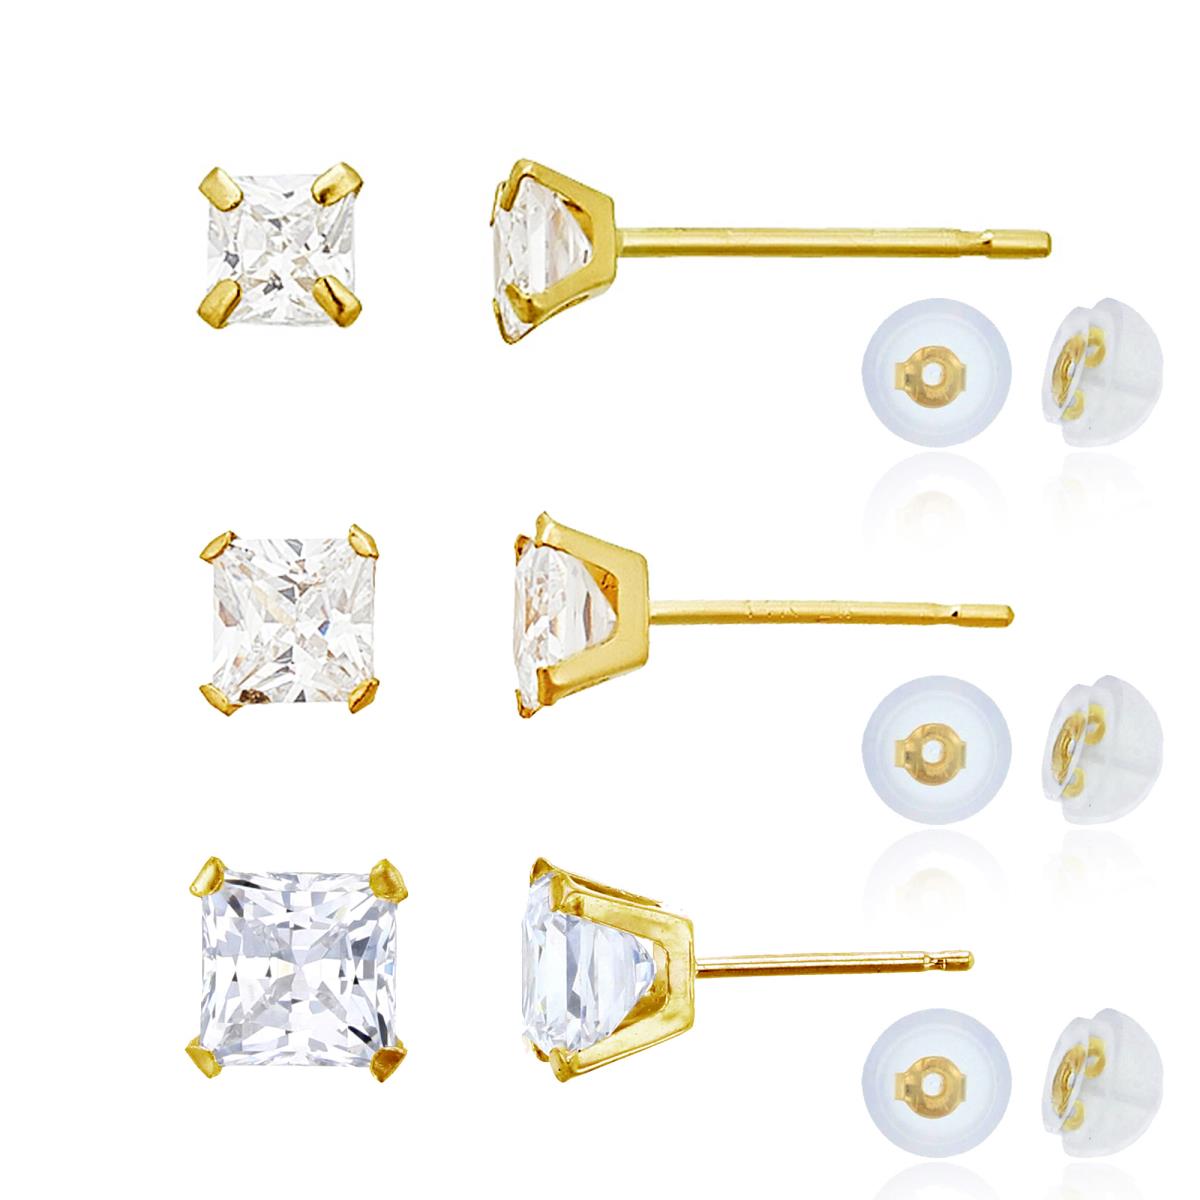 14K Yellow Gold 3x3/4x4/5x5mm Square Solitaire Stud Earring Set